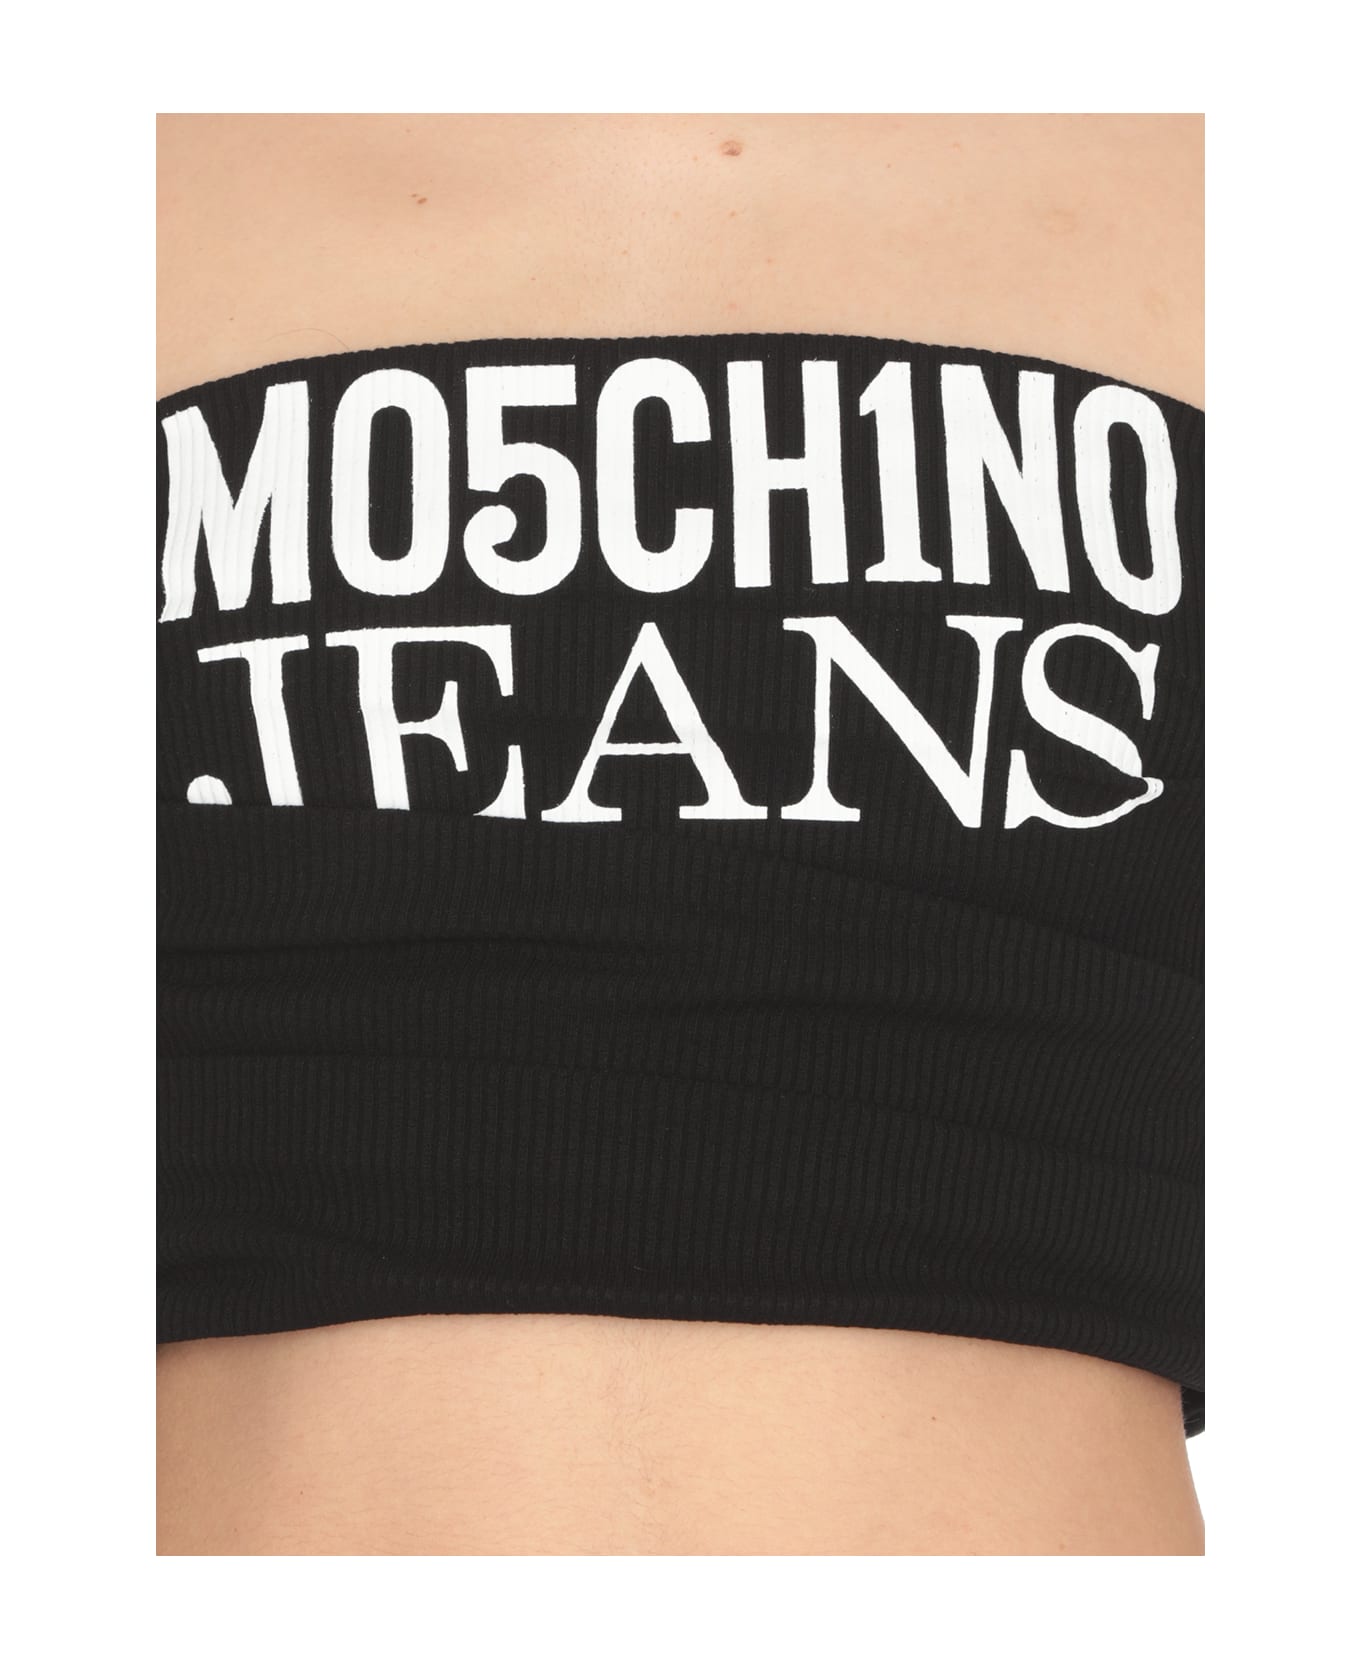 M05CH1N0 Jeans Top With Logo - Black